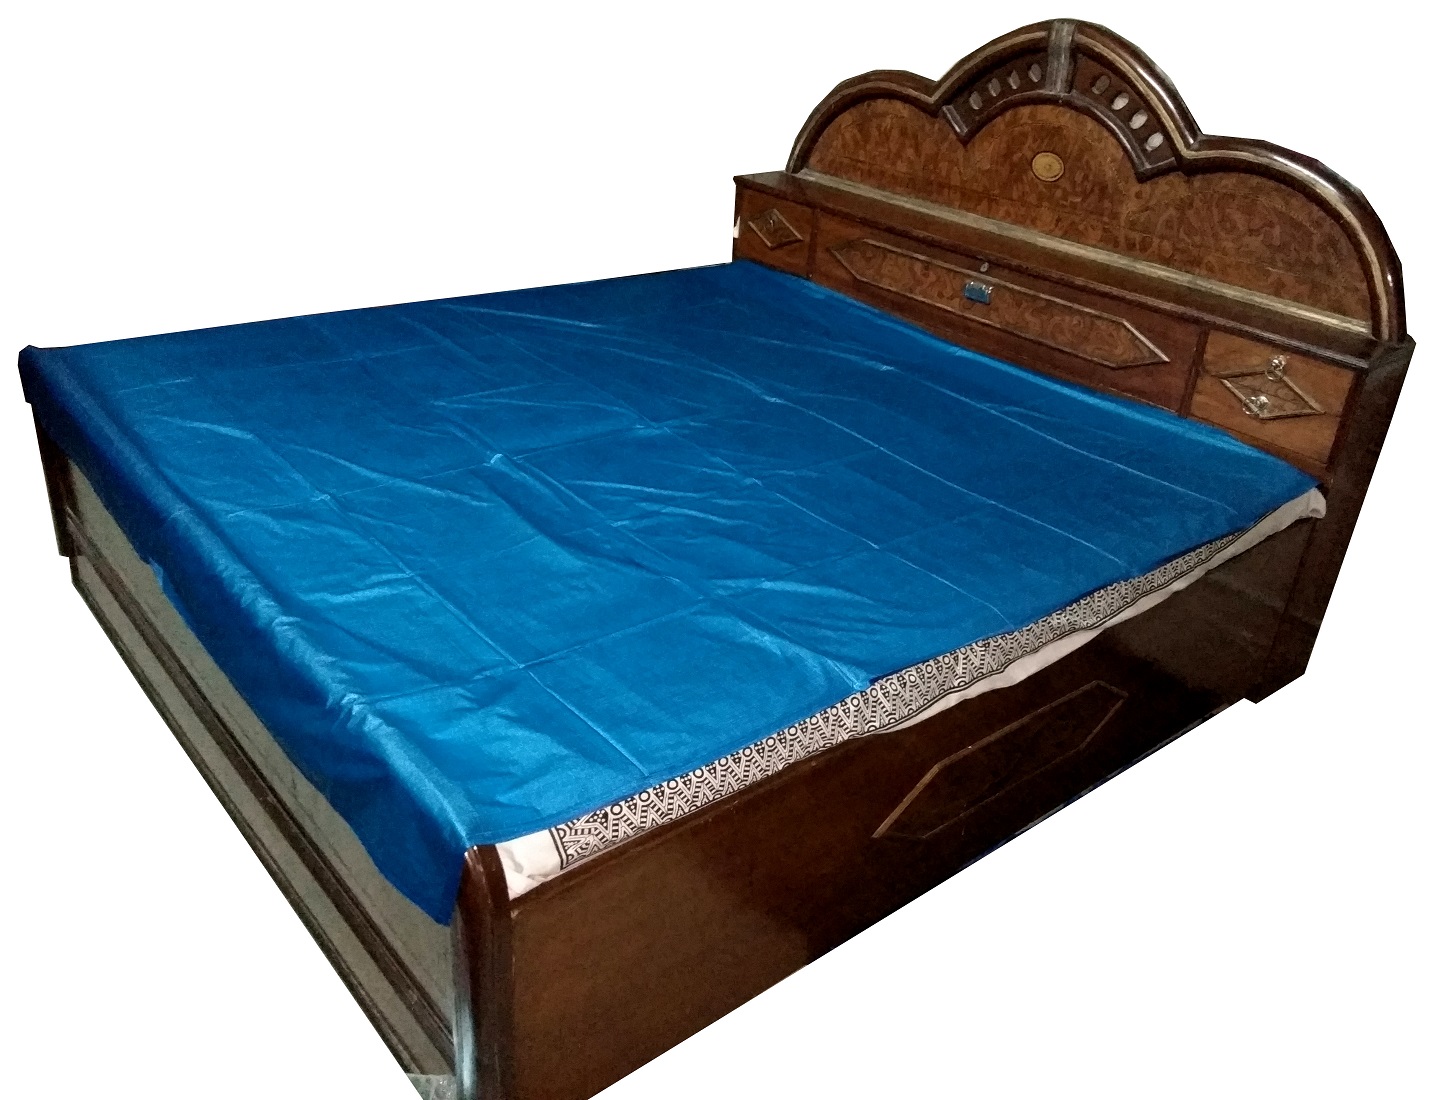 plastic mattress cover for toddler bed